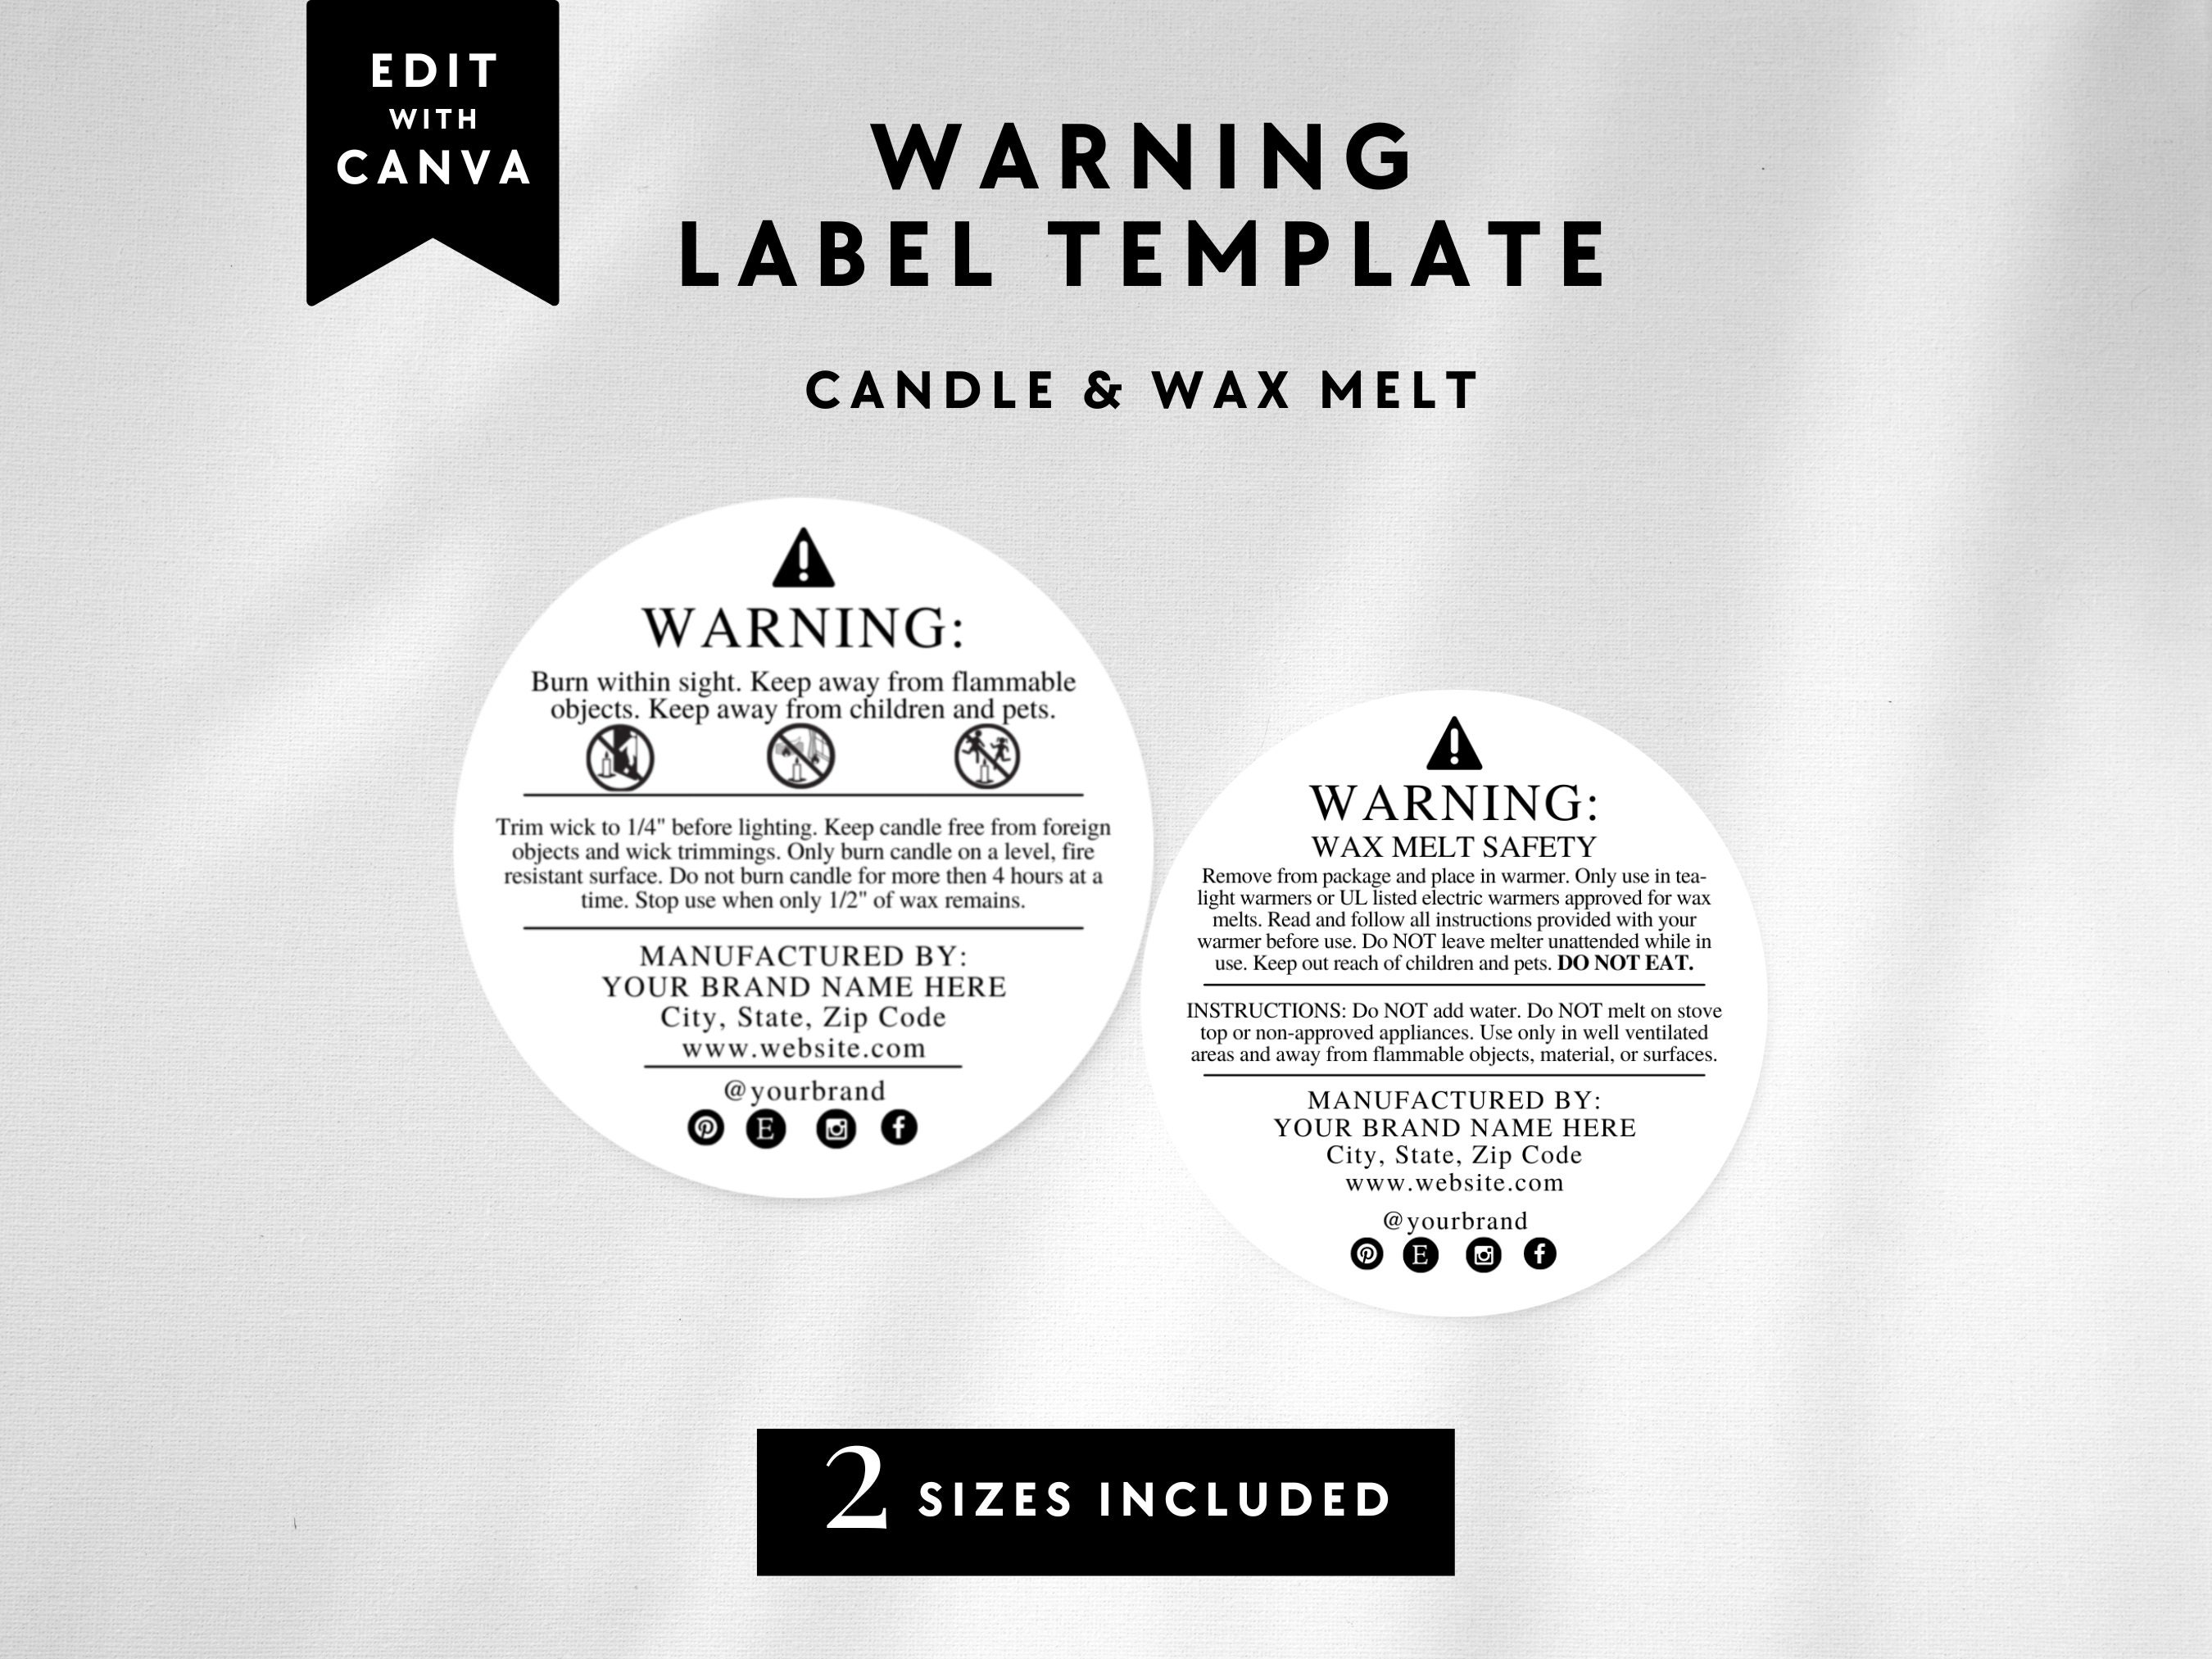 Wooden Wick Candle Safety Guide, Candle Care Card Template, Minimalist Wooden  Wick Candle Warning Instructions, Black & White, Instant M-001 